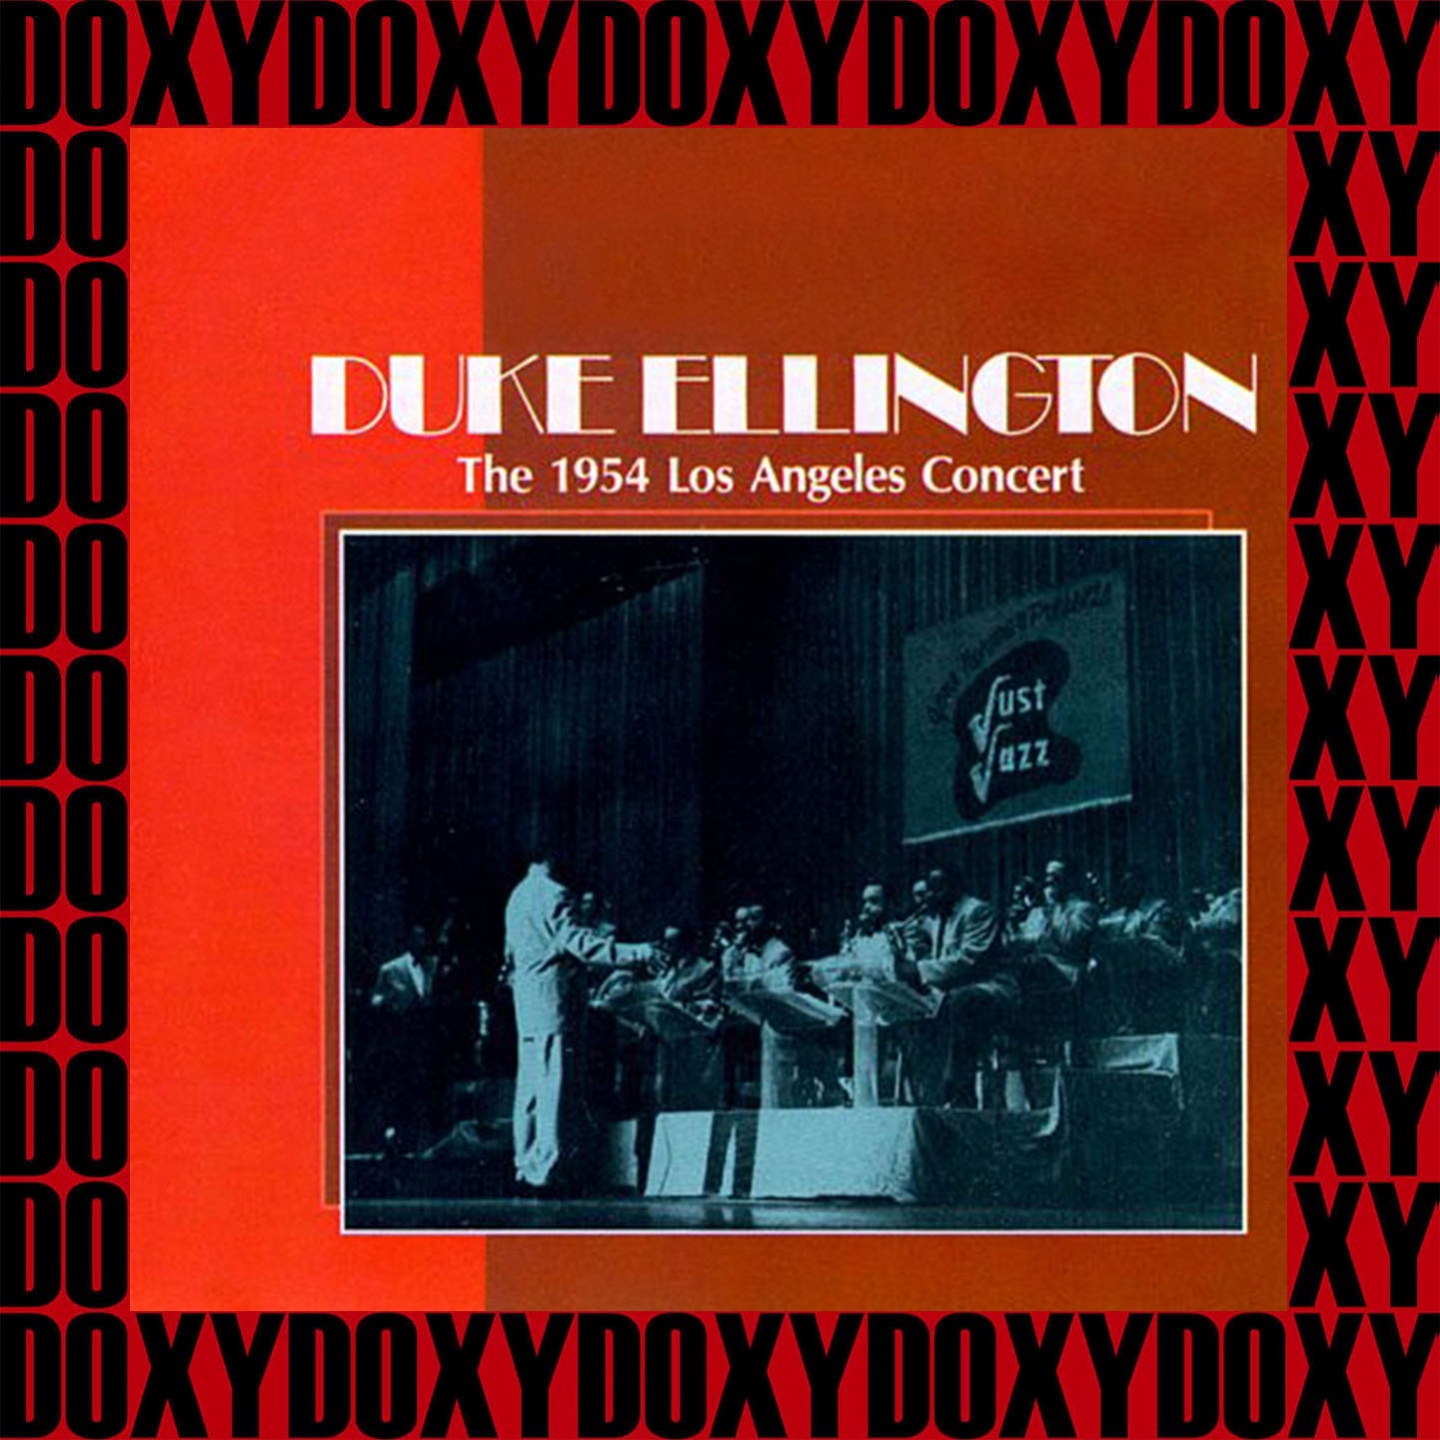 The 1954 Los Angeles Concert (Remastered Version) (Doxy Collection)